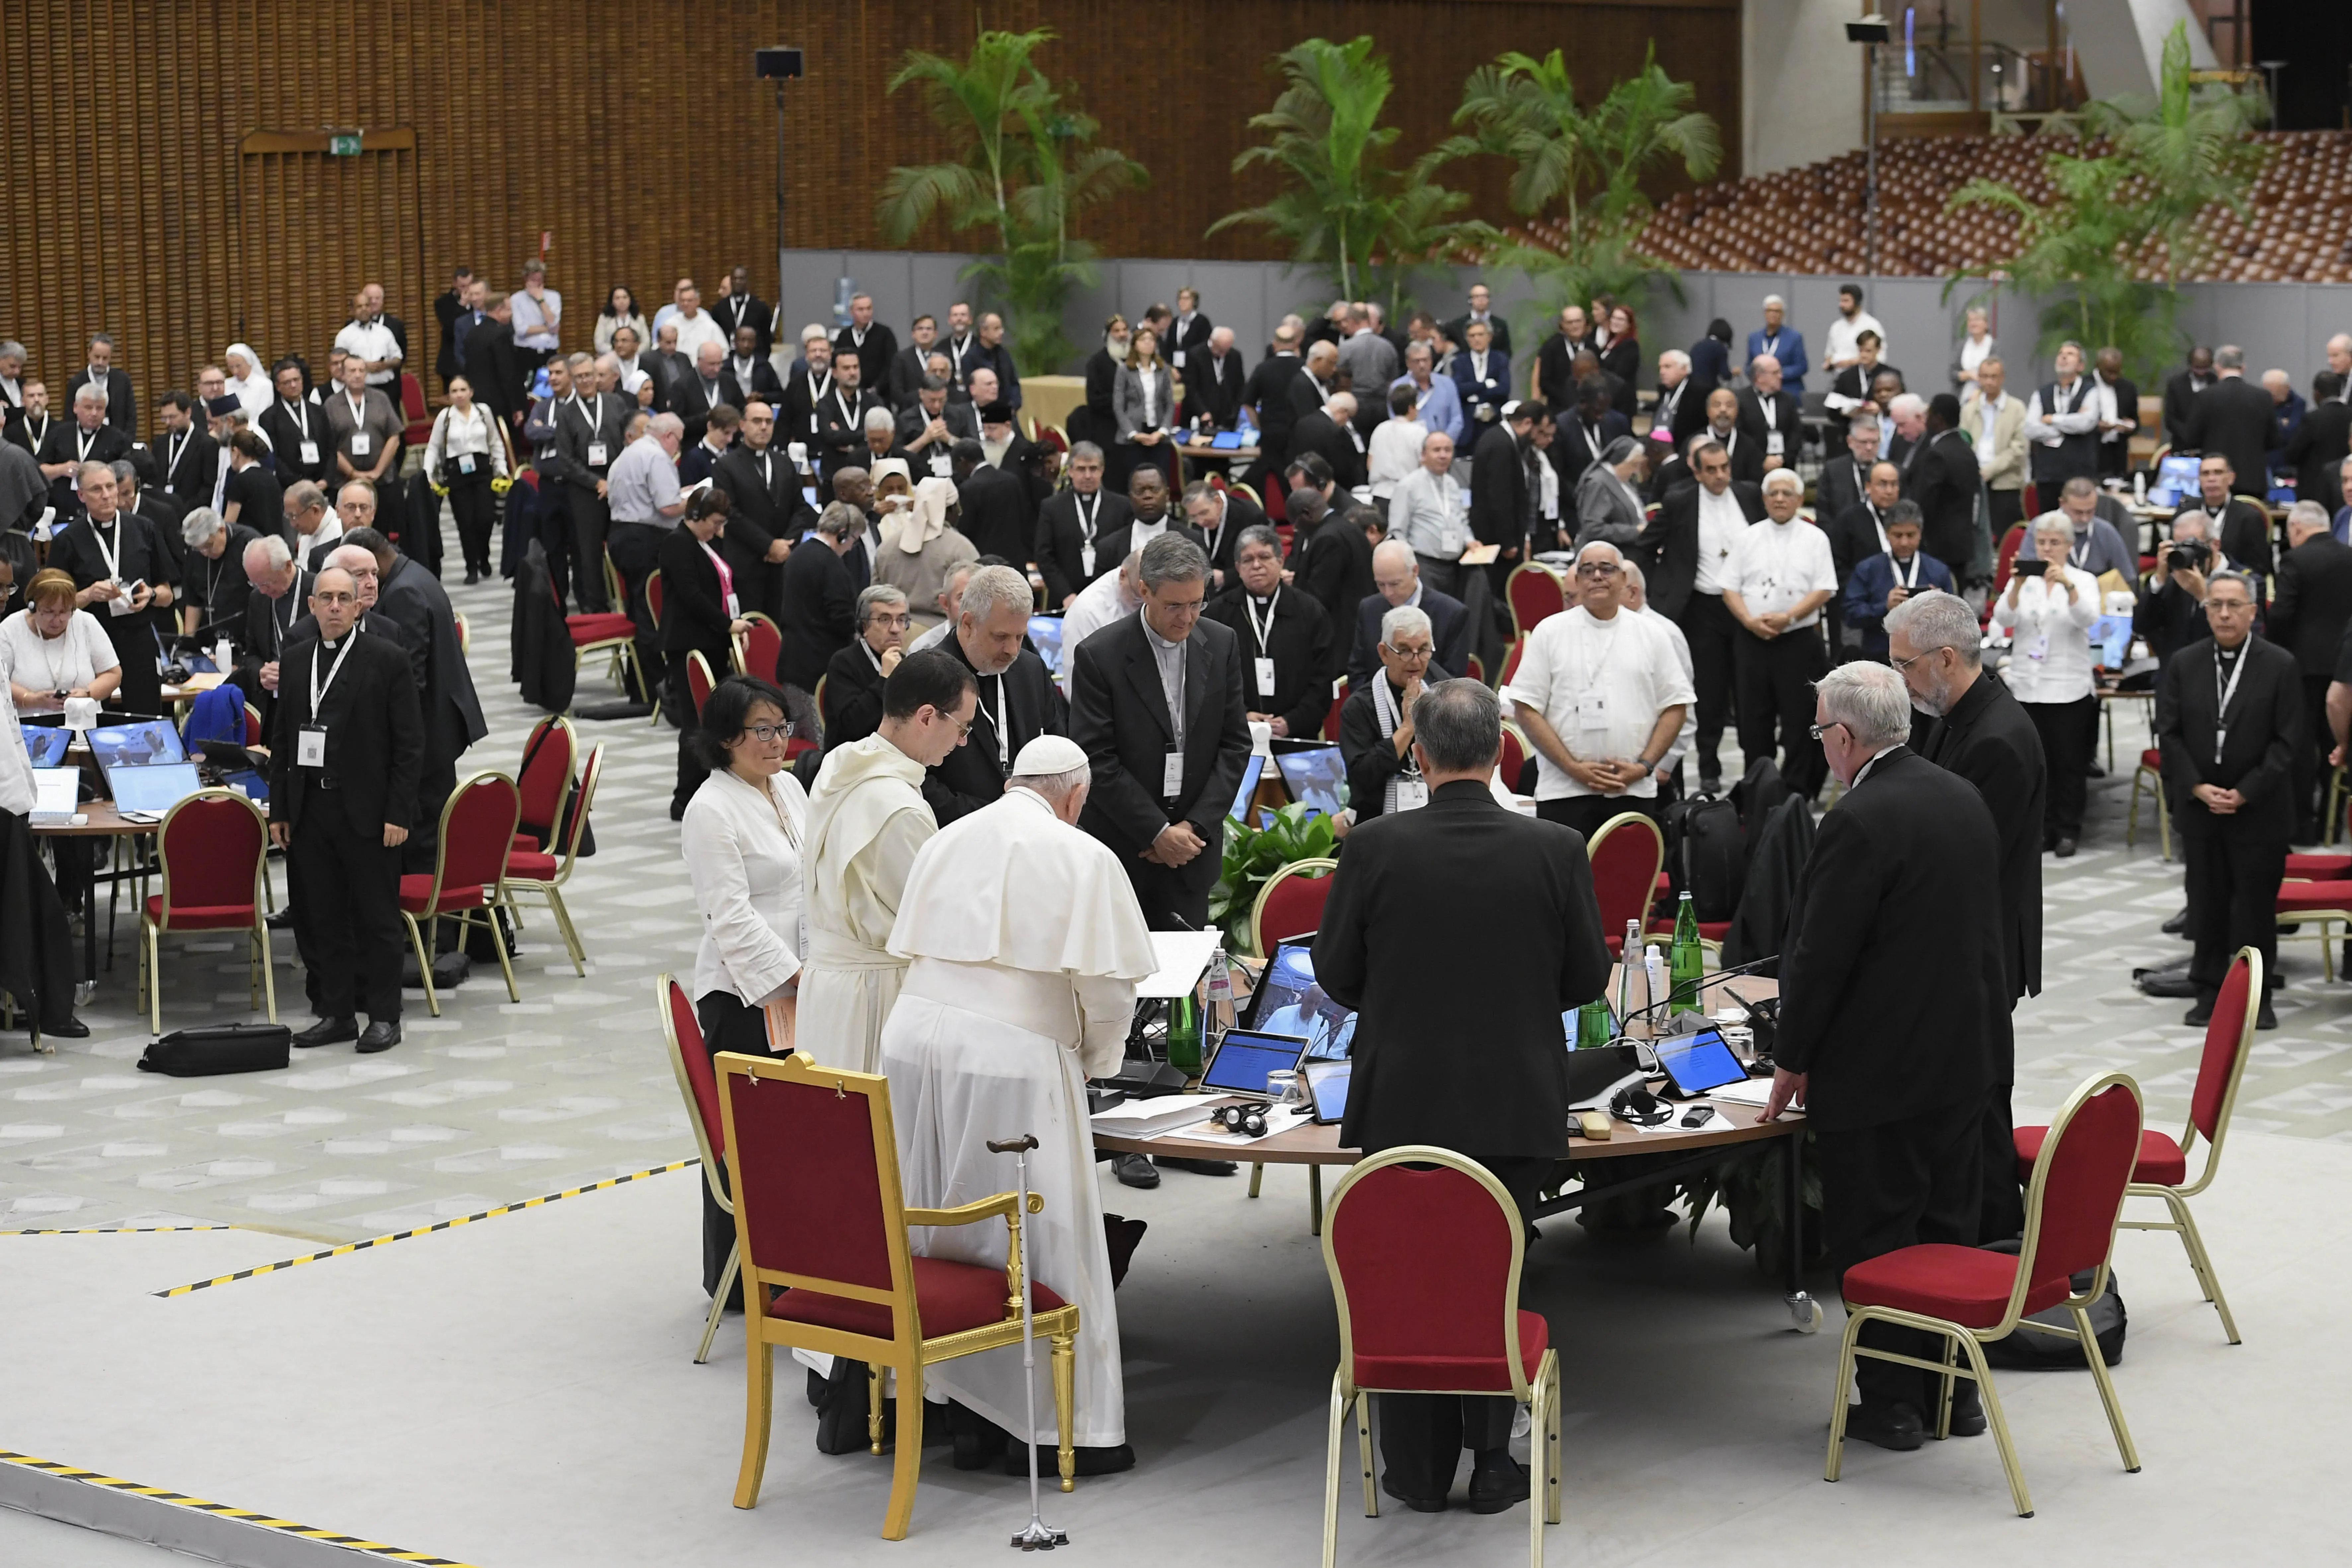 Pope Francis leads the Synod on Synodality delegates in prayer on Oct. 25, 2023.?w=200&h=150